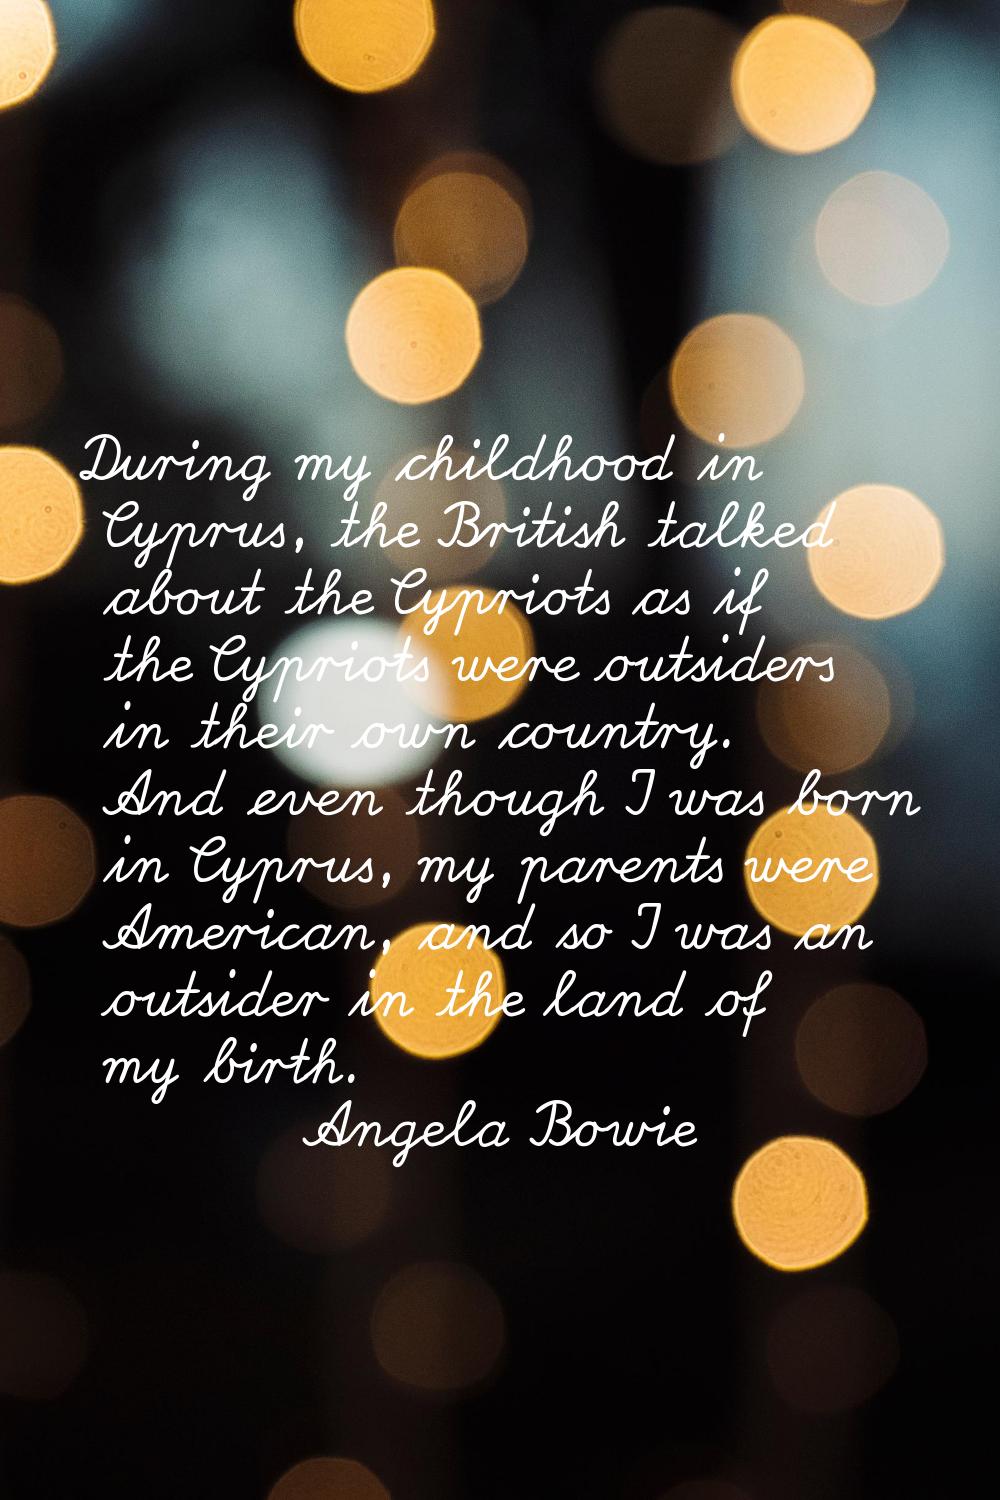 During my childhood in Cyprus, the British talked about the Cypriots as if the Cypriots were outsid